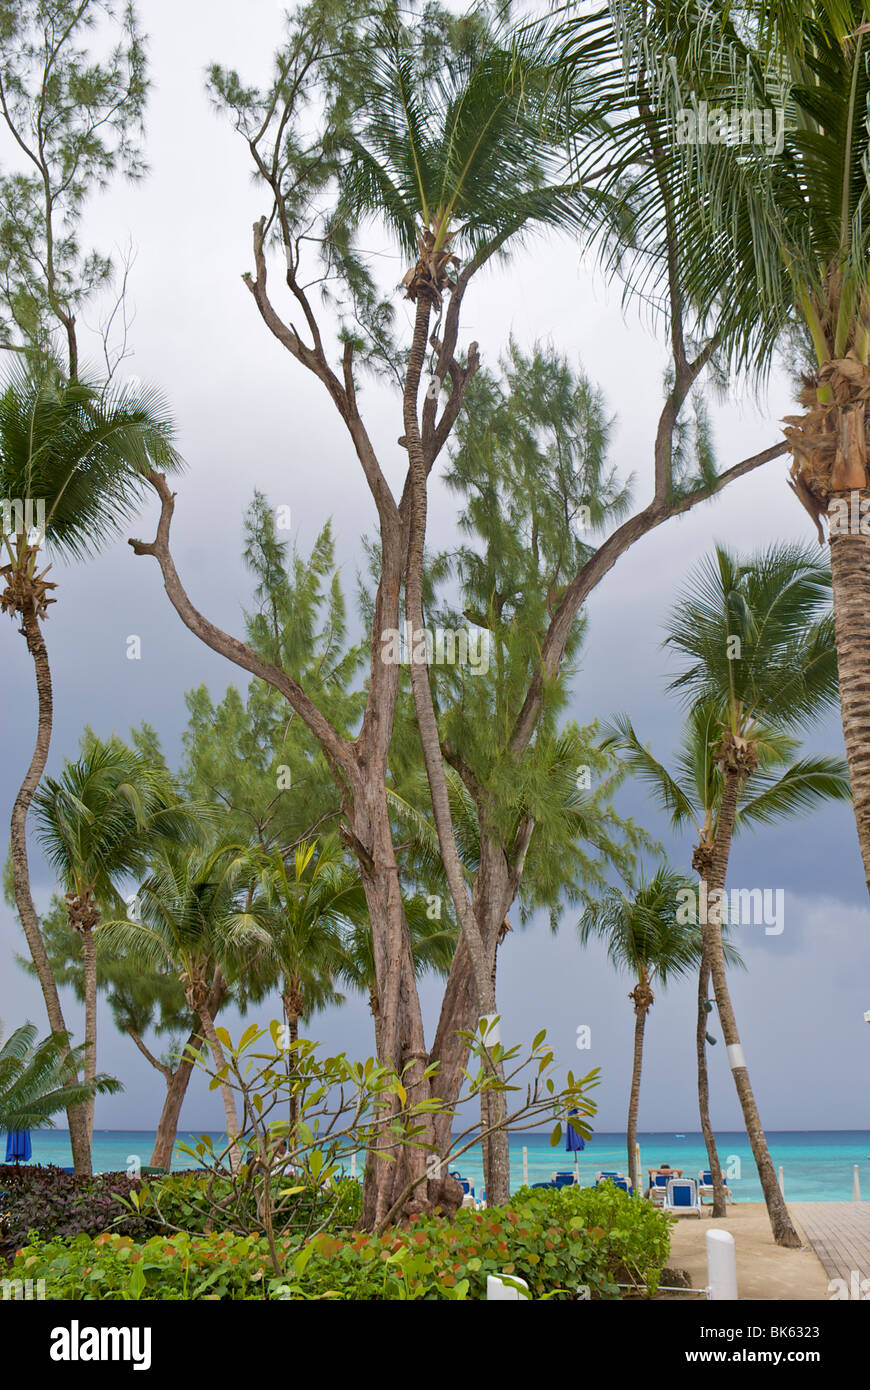 Palm trees with stormy sky, looking out to sea in distance Stock Photo